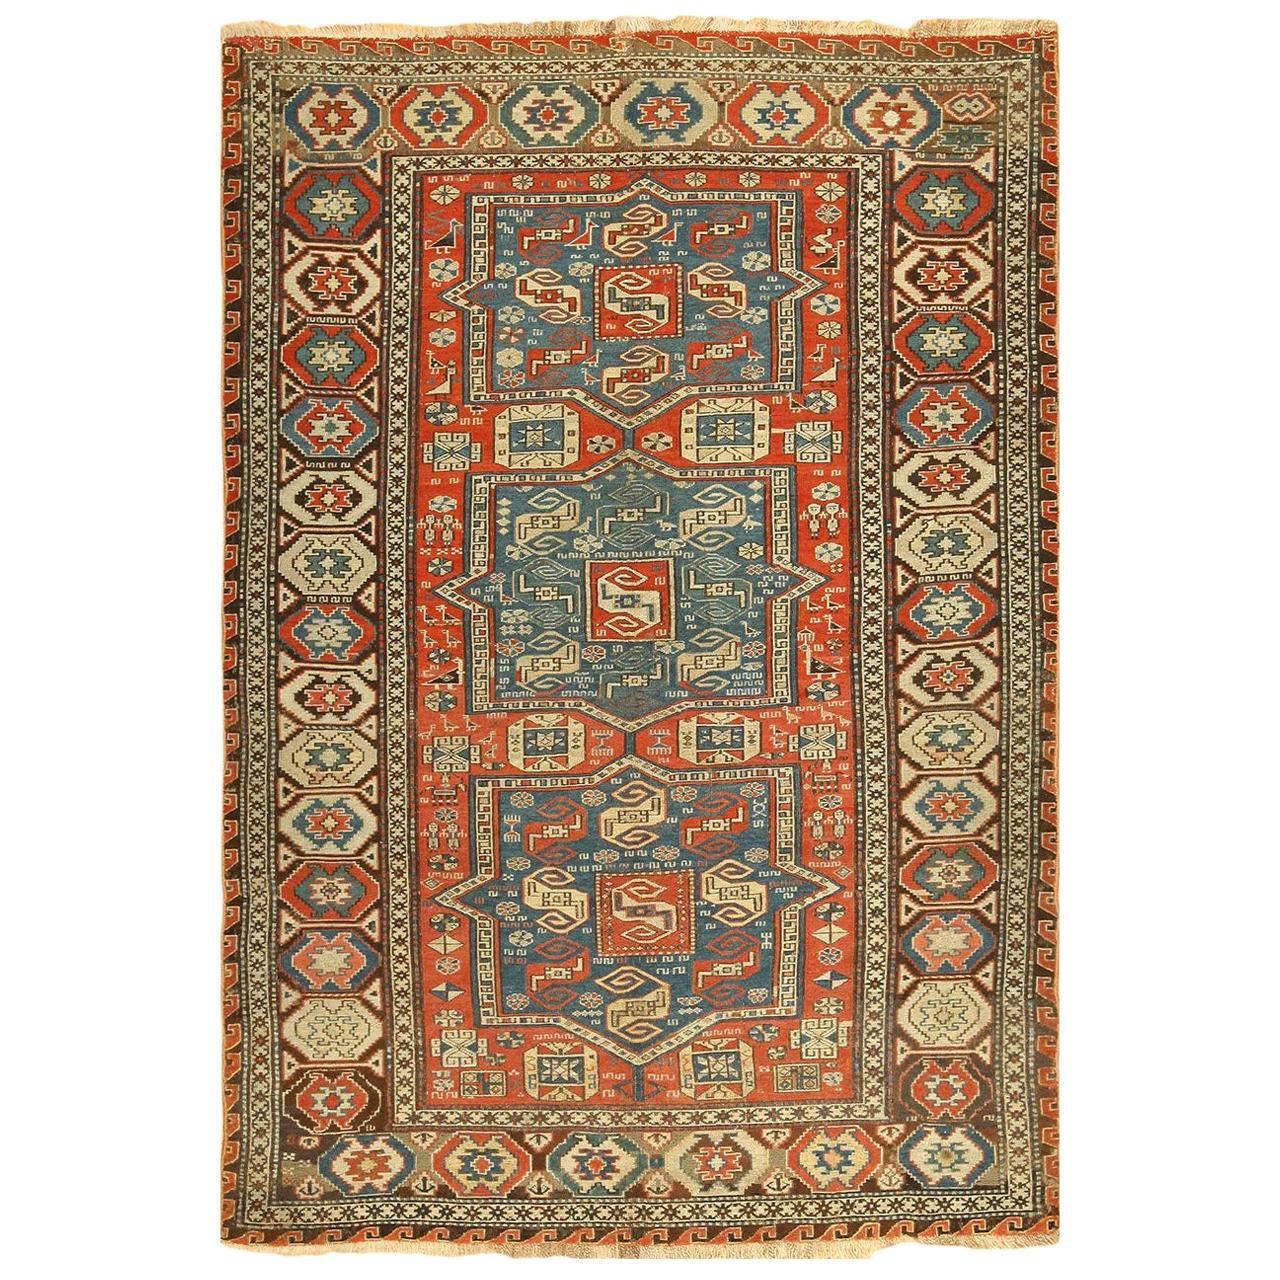 Small Antique Tribal Soumak Caucasian Rug. Size: 4 ft 4 in x 6 ft 5 in 